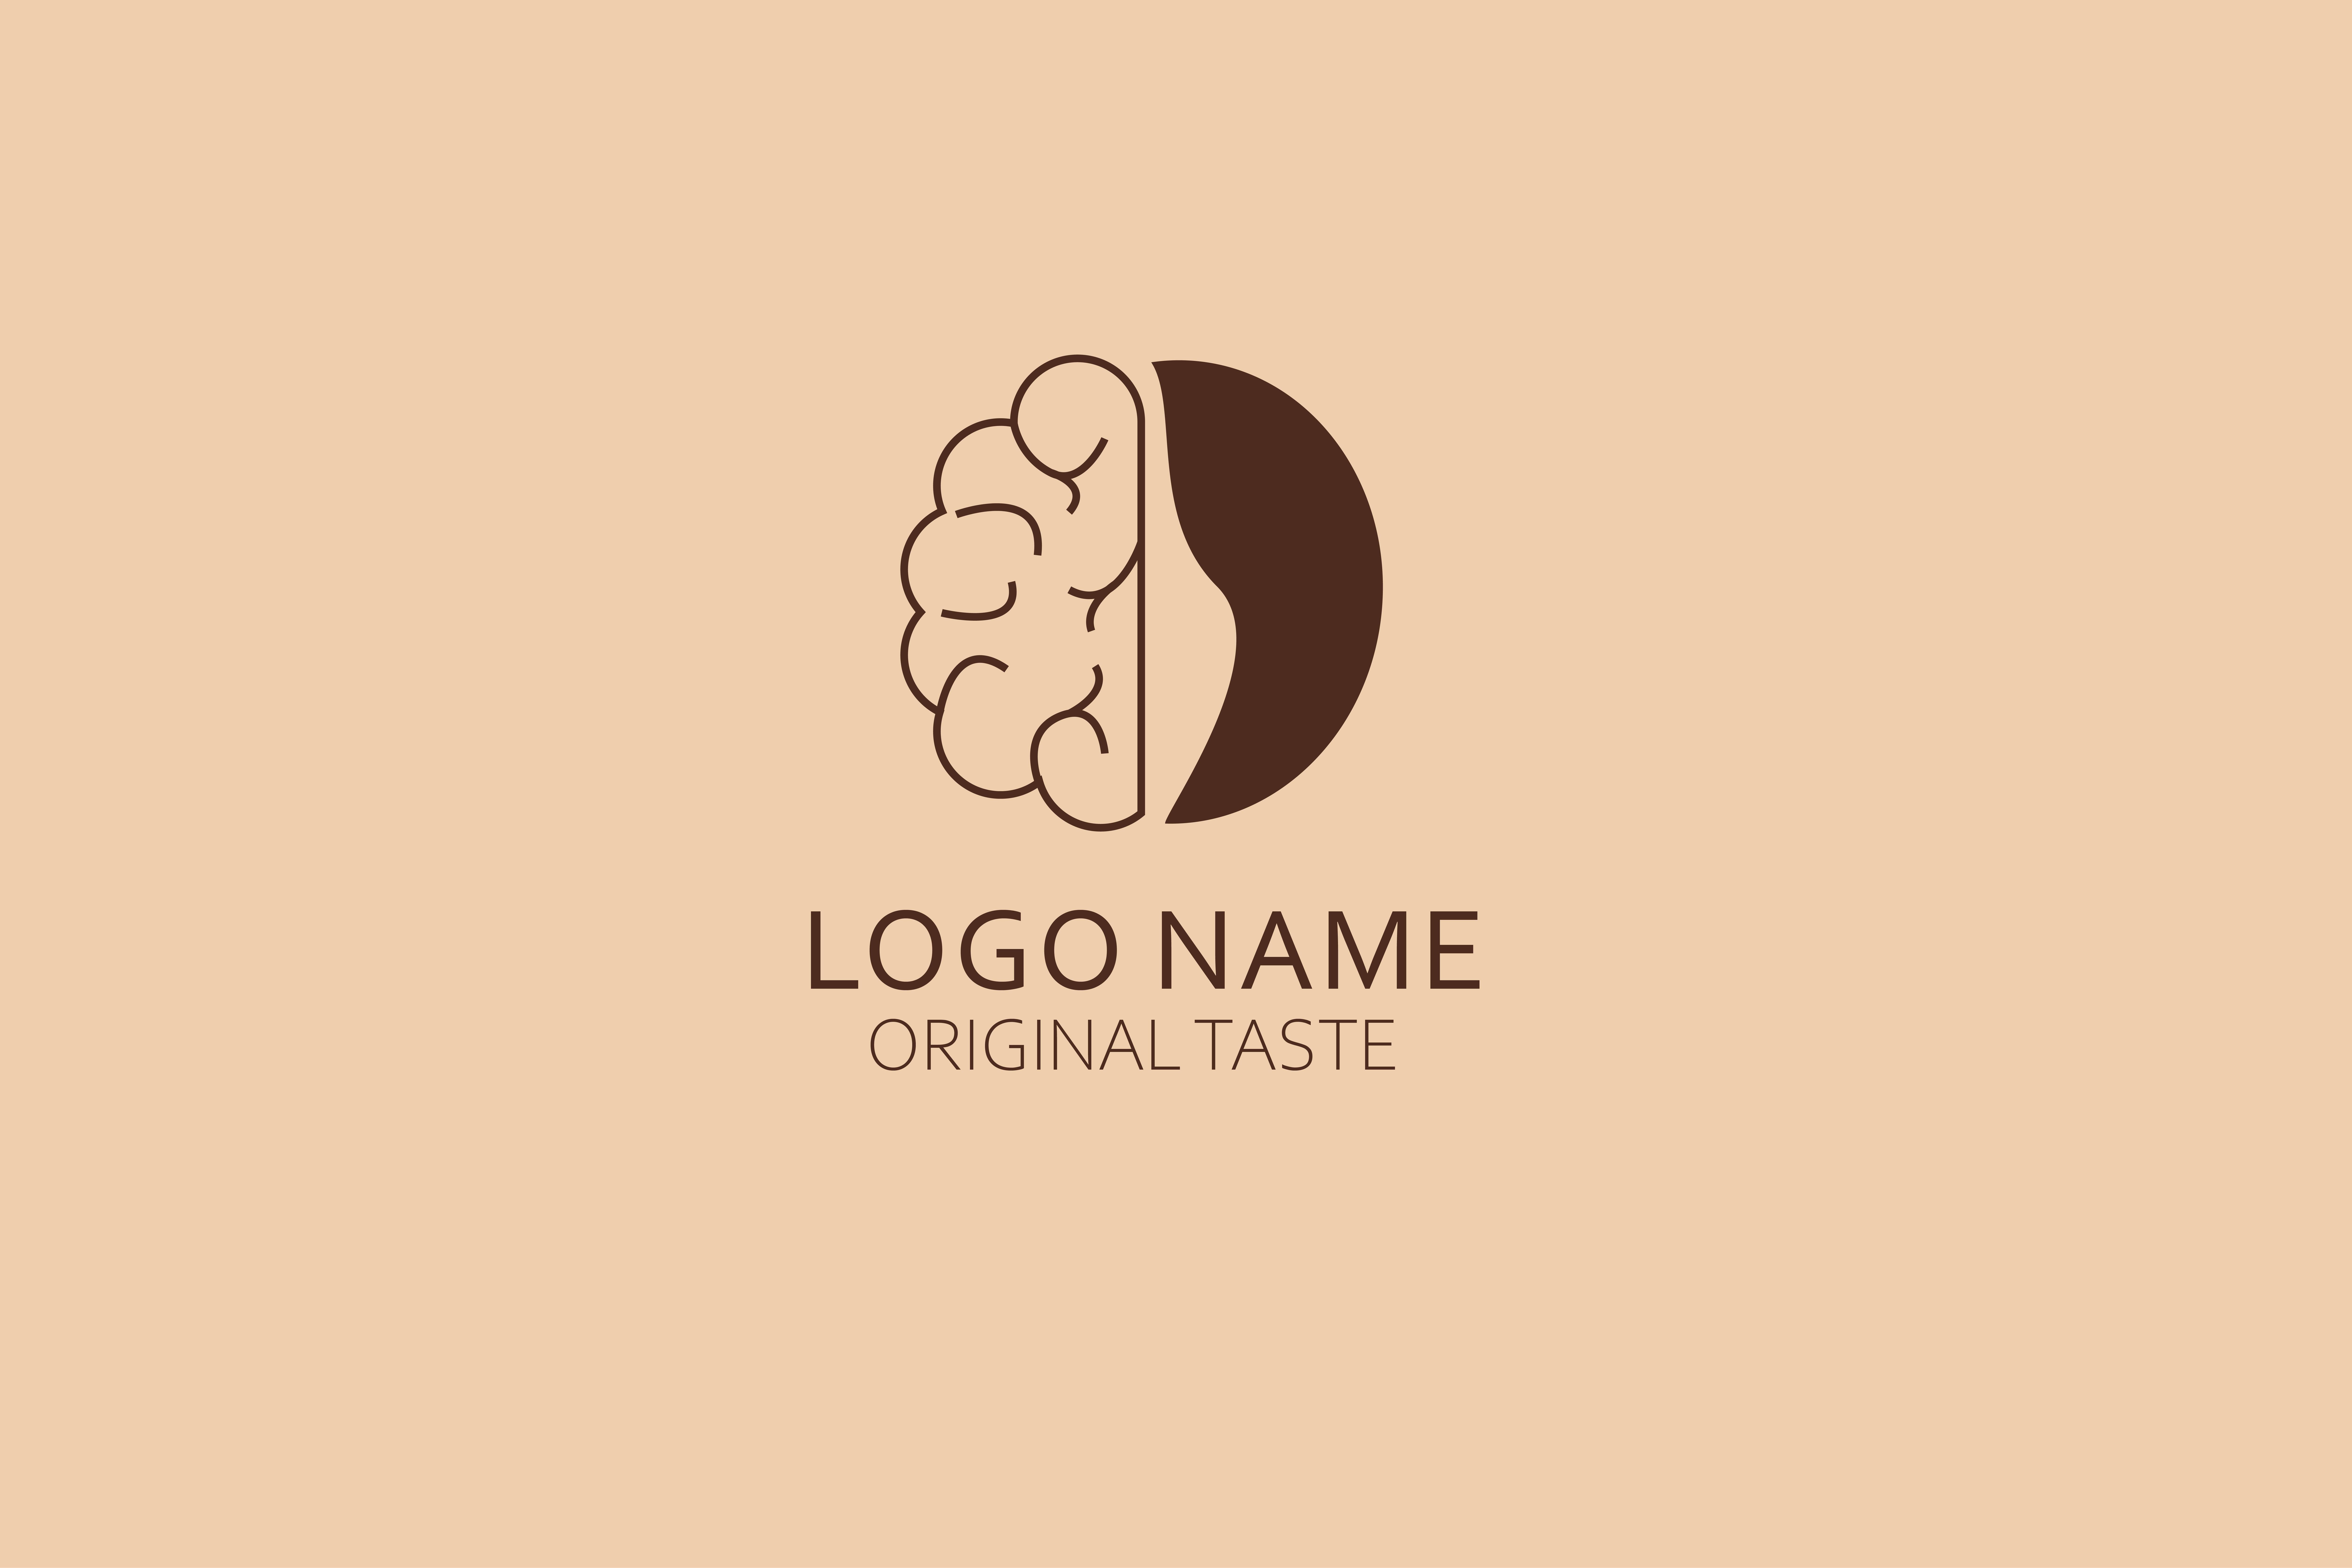 Logo for a company with a brain.